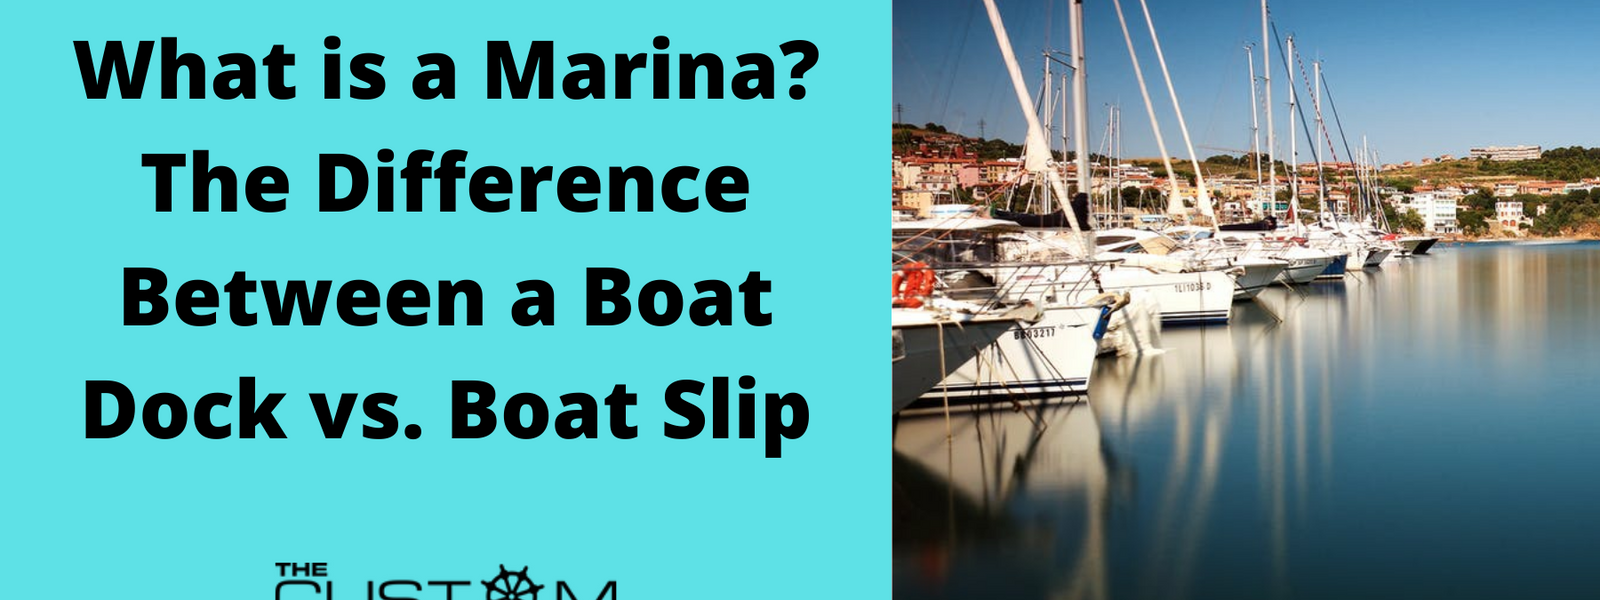 What is a Marina? The Difference Between a Boat Dock vs. Boat Slip